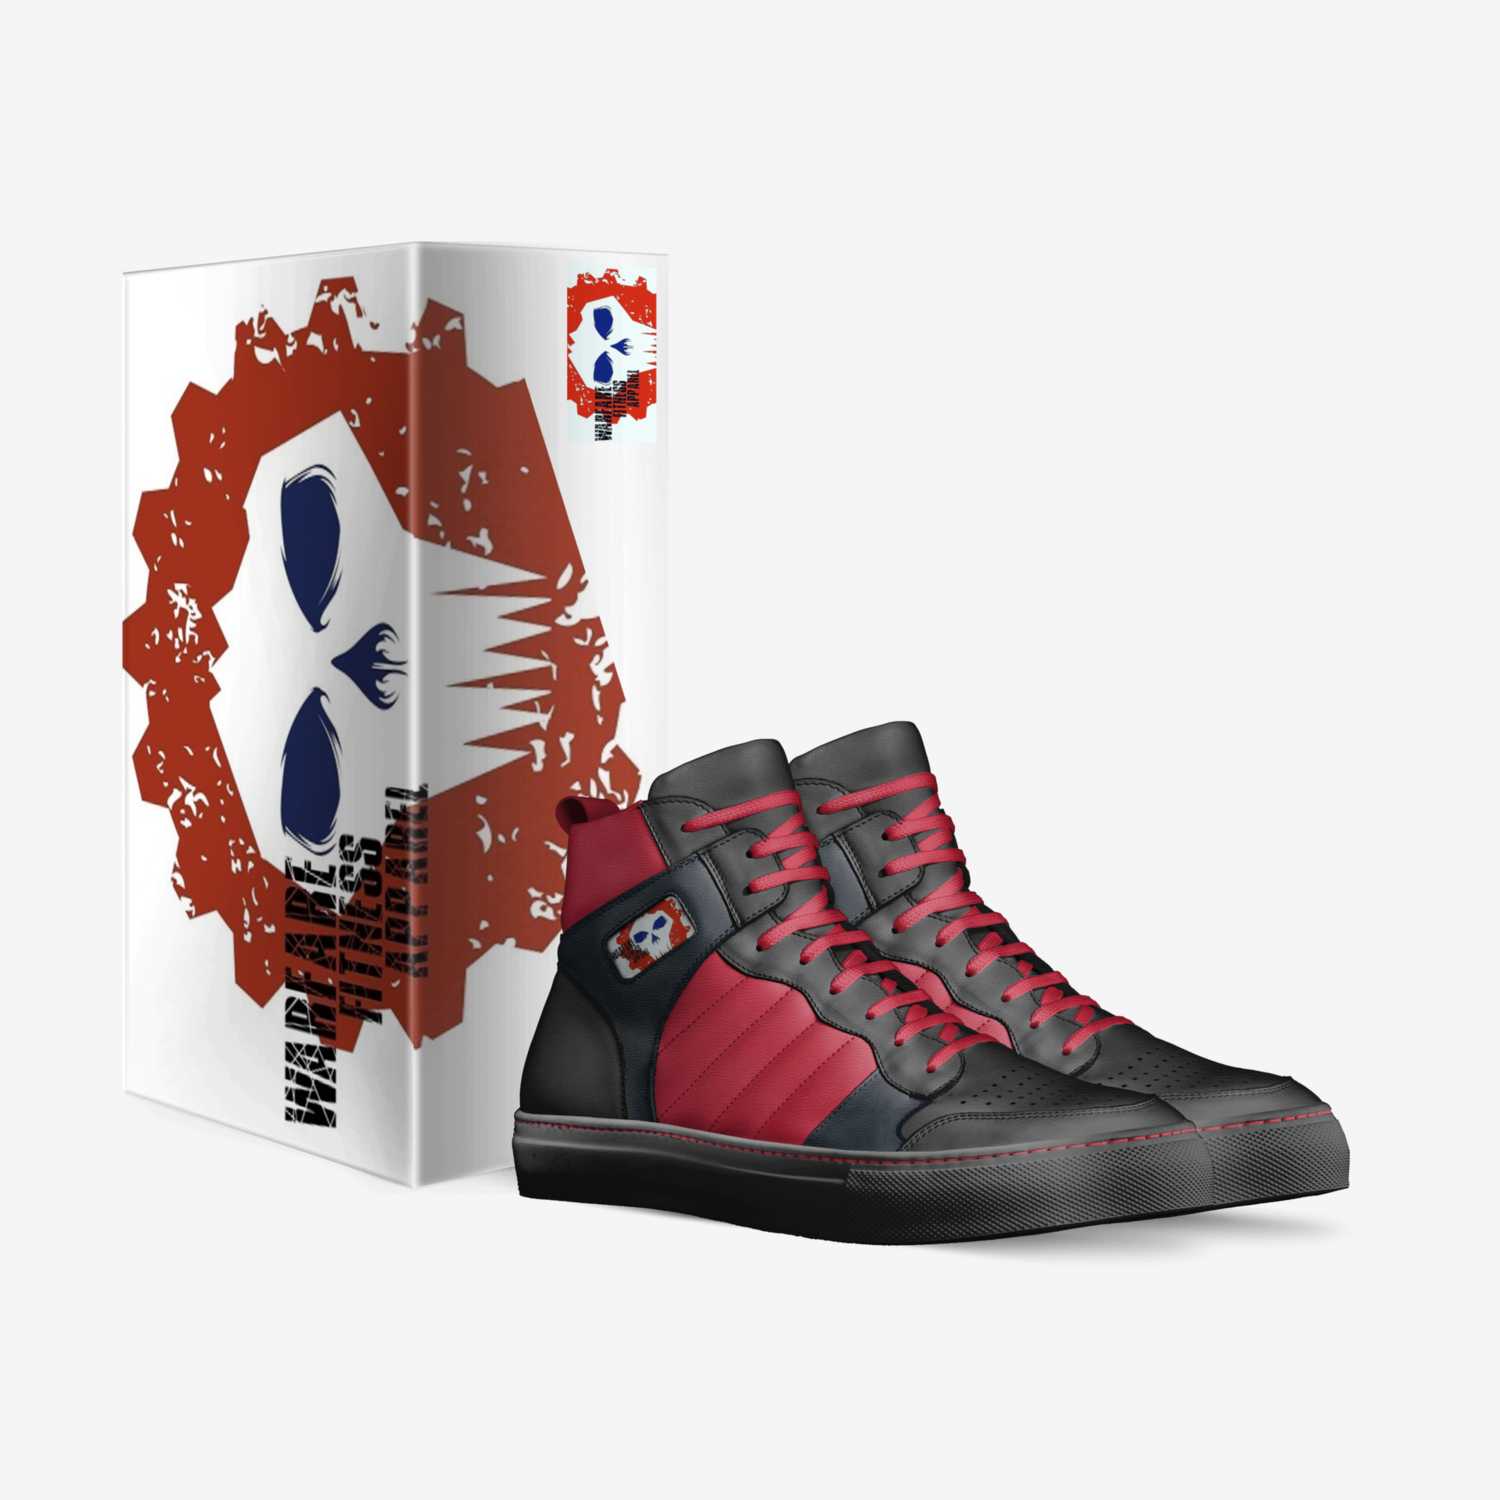 Warfare Fitness  custom made in Italy shoes by Jordan Wise | Box view